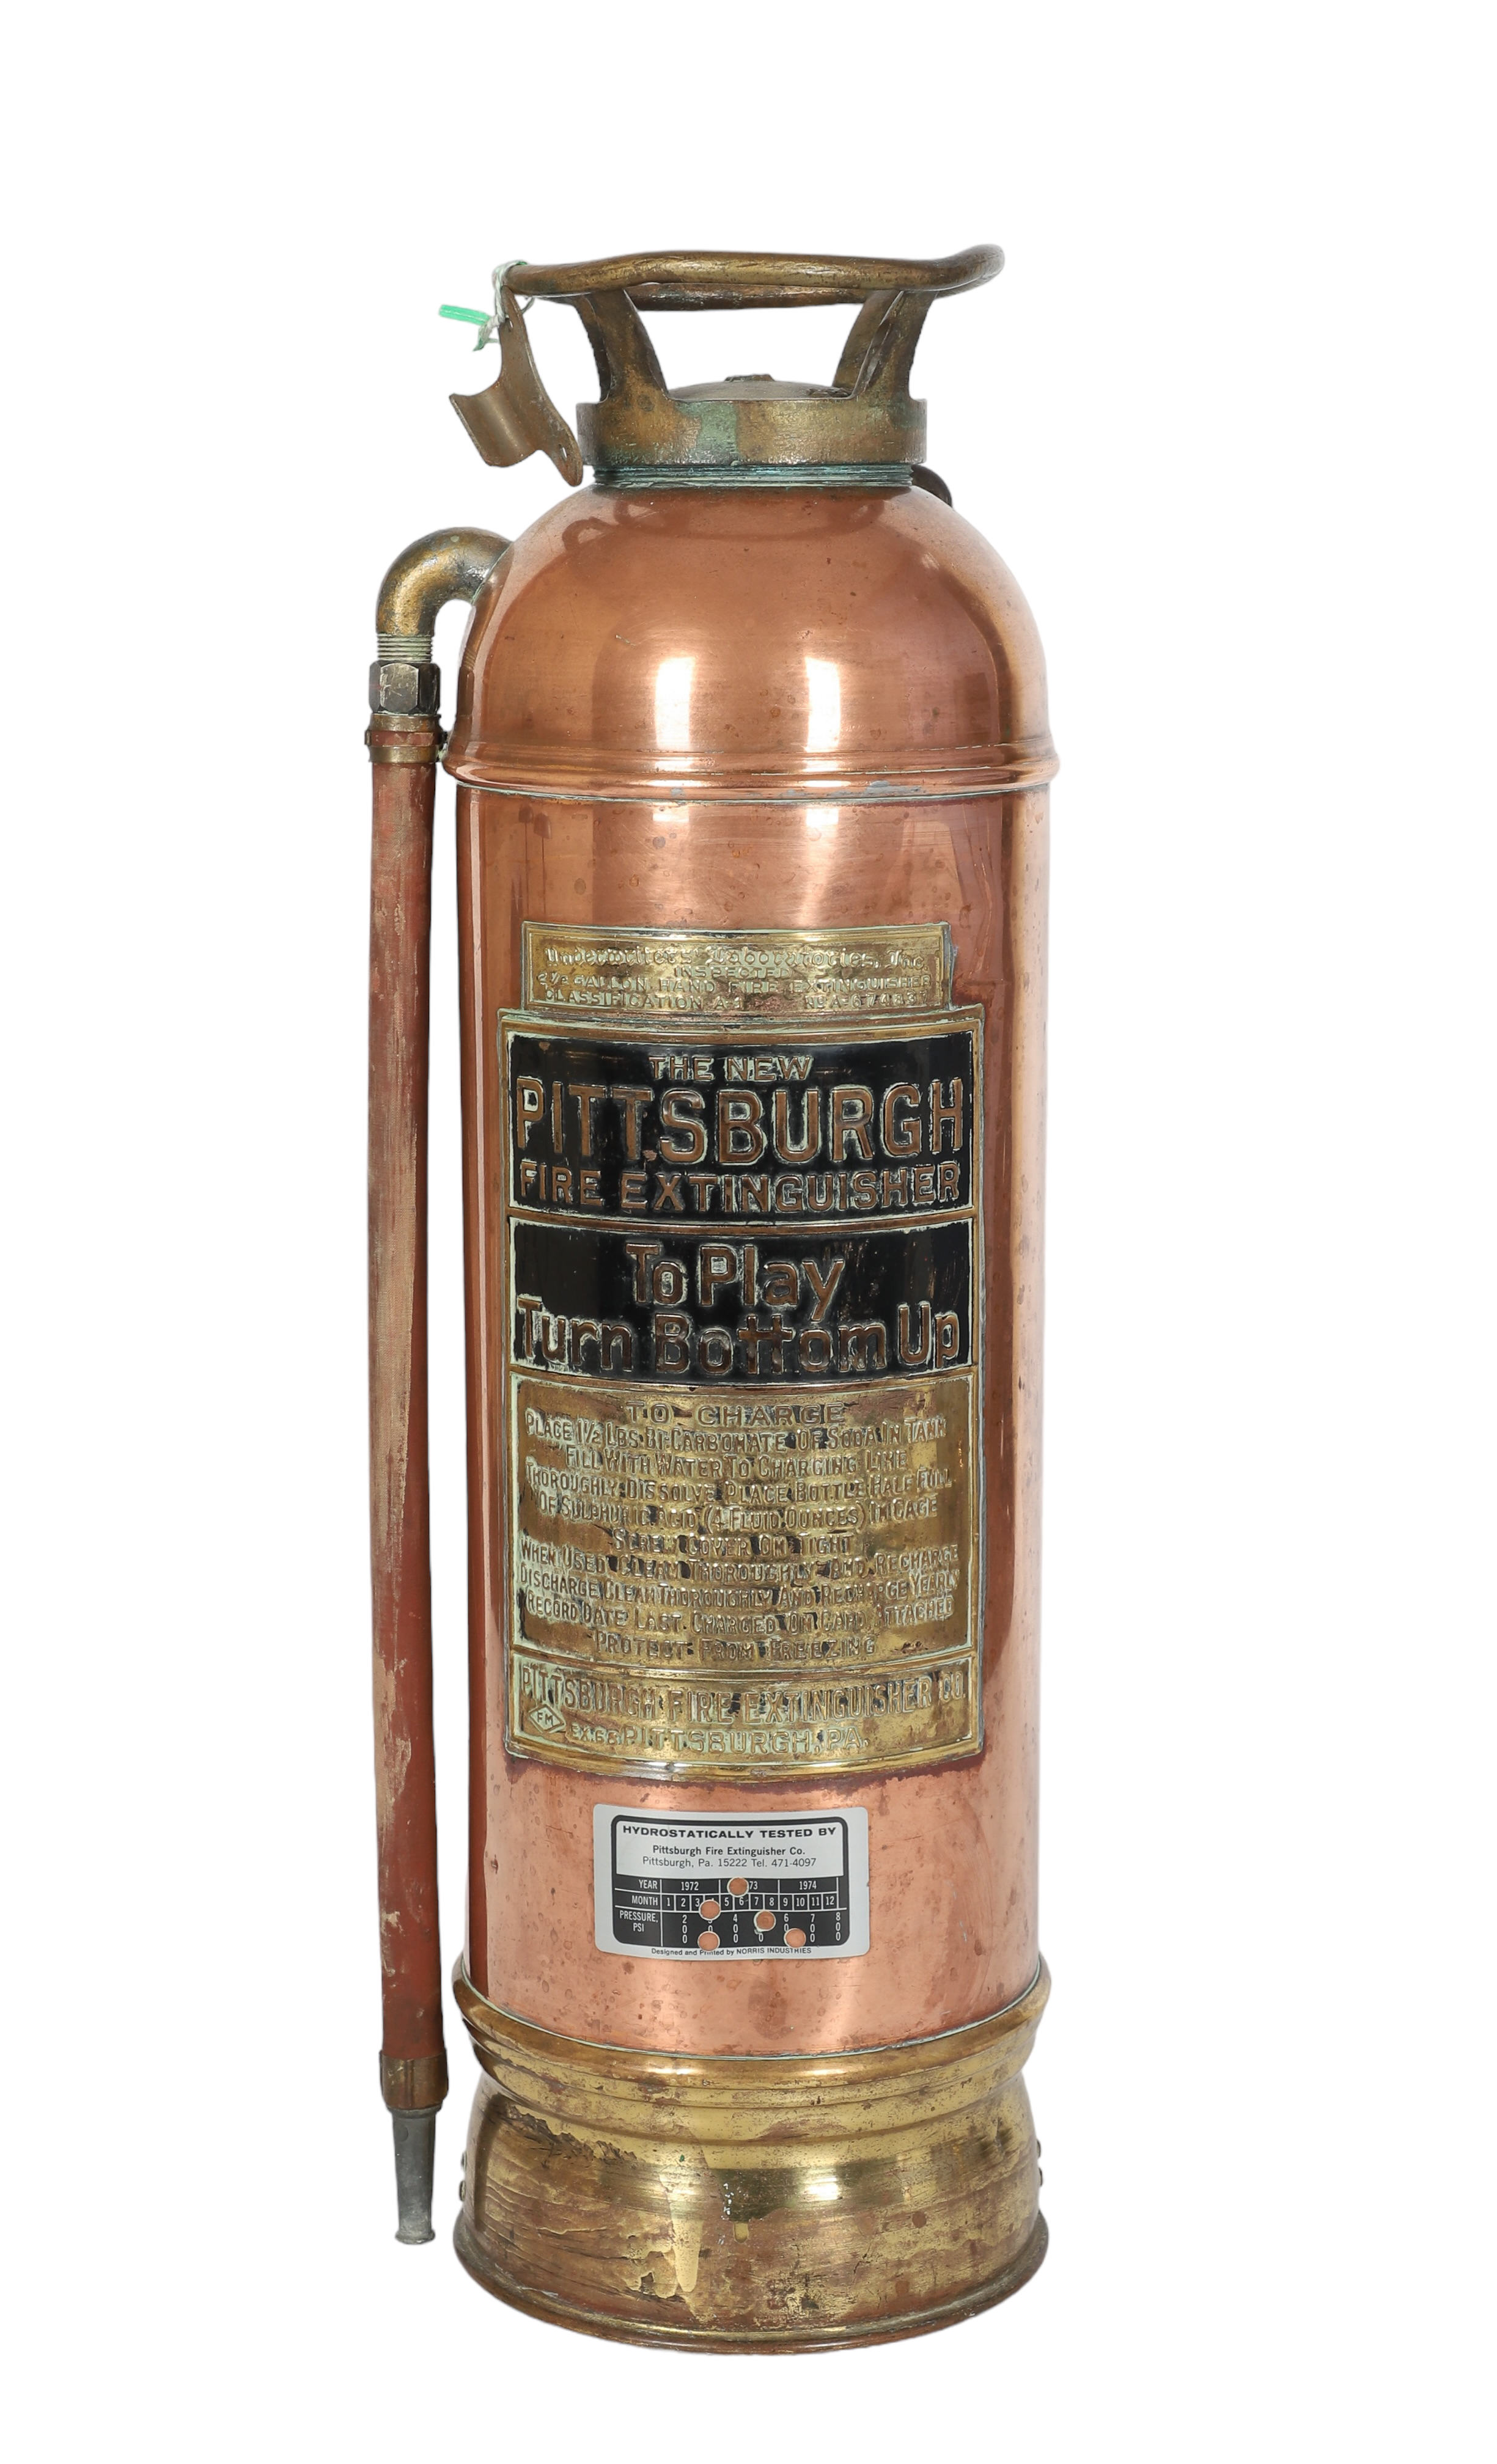 Pittsburgh Fire Extinguisher, copper